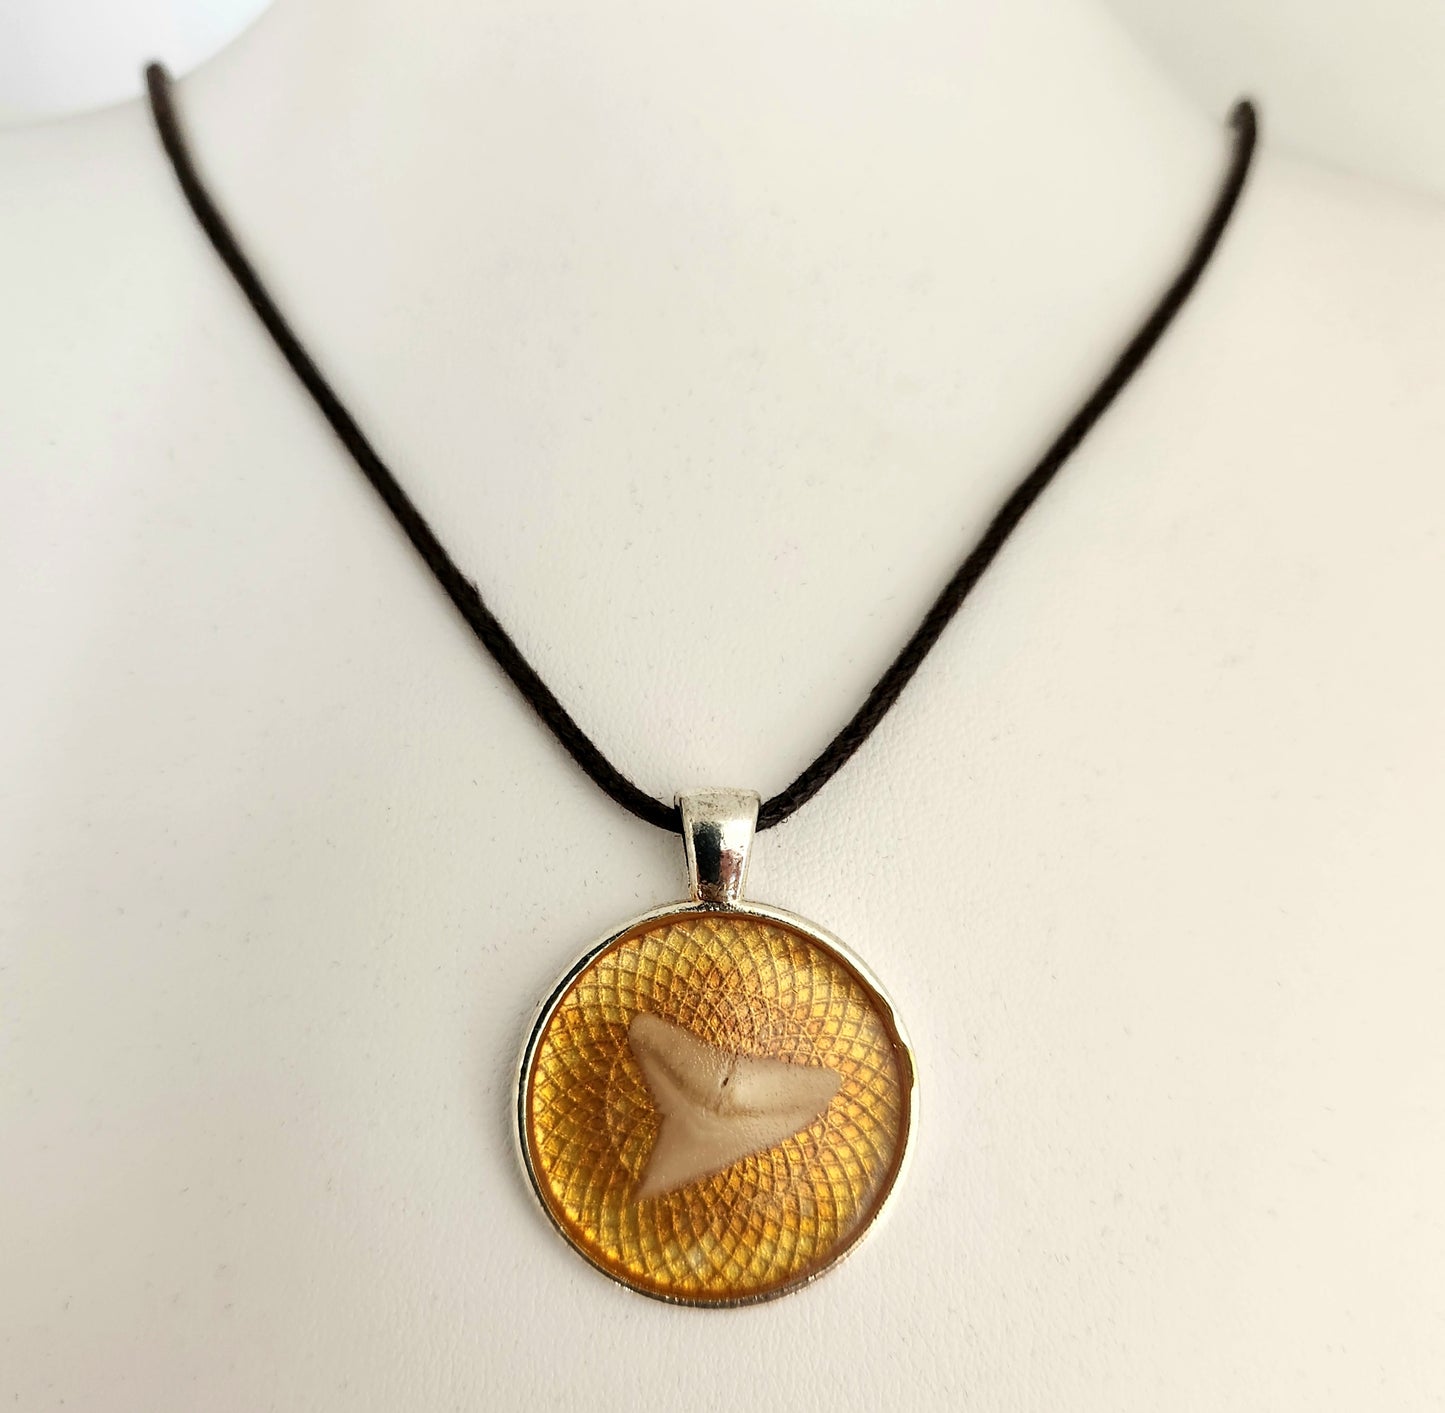 Hand crafted Shark Tooth Necklace in Resin